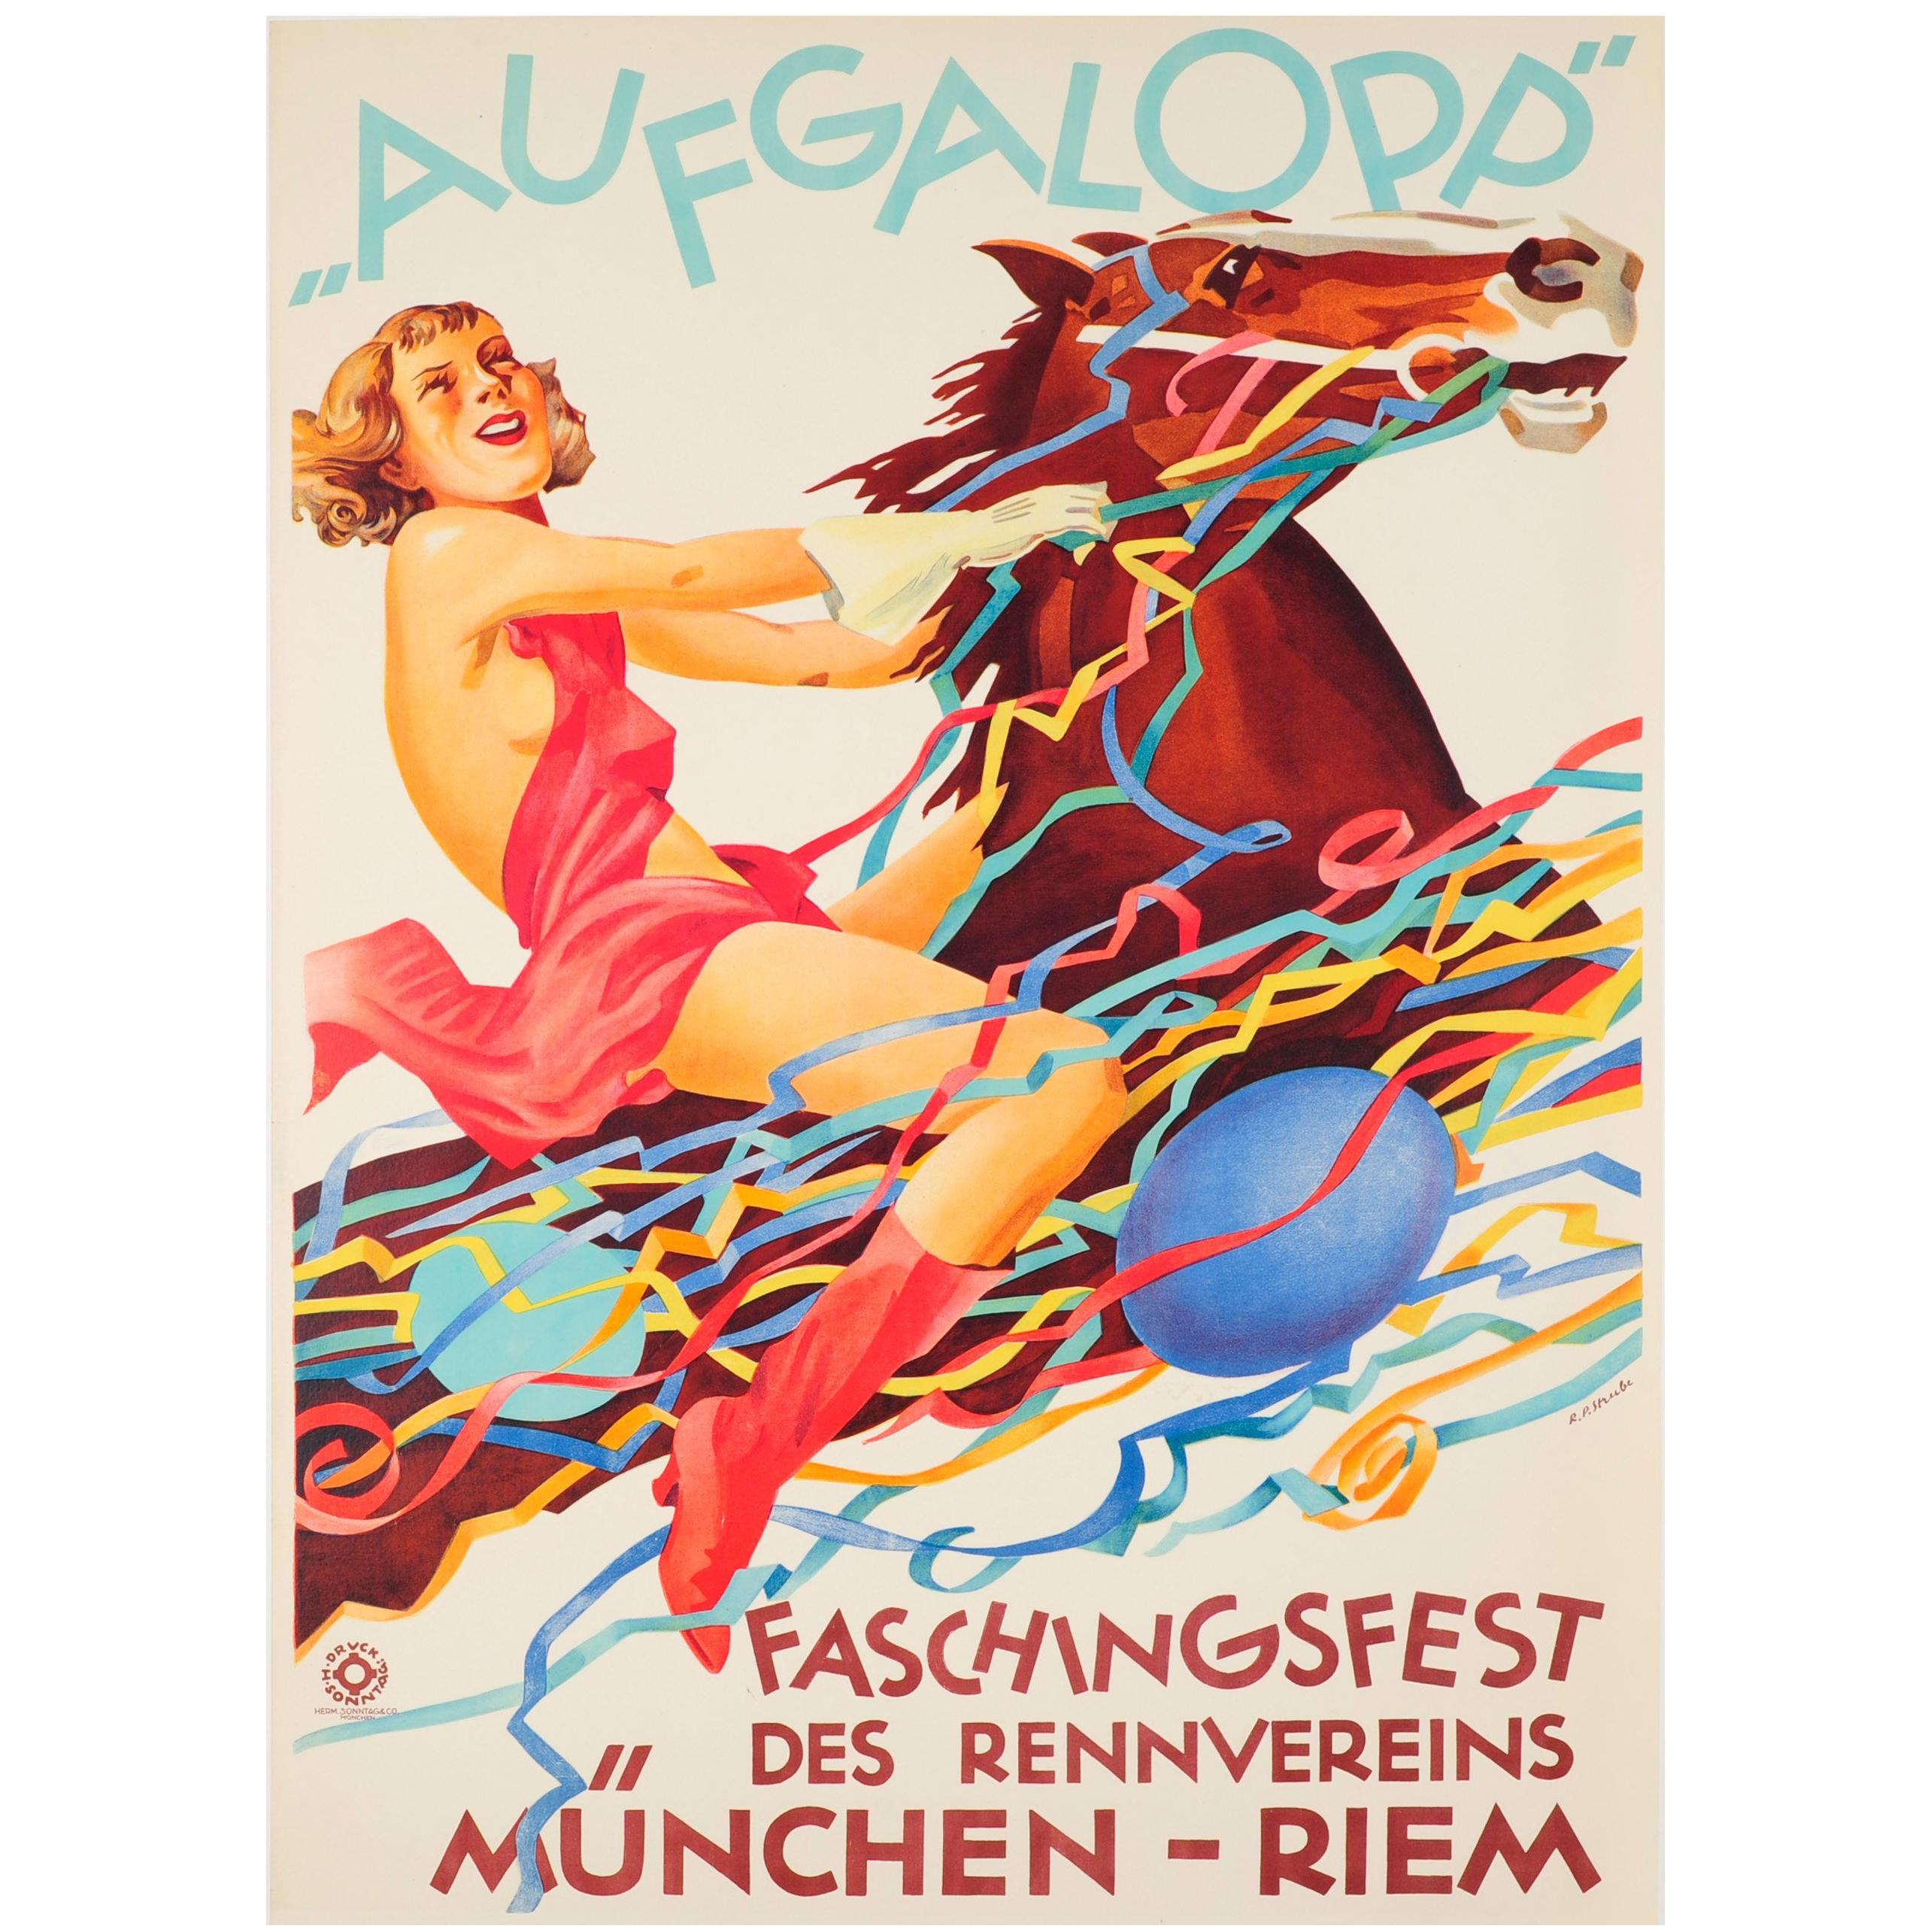 Original Vintage Poster for the Aufgalopp Faschingsfest Carnival Munich Ft Horse For Sale